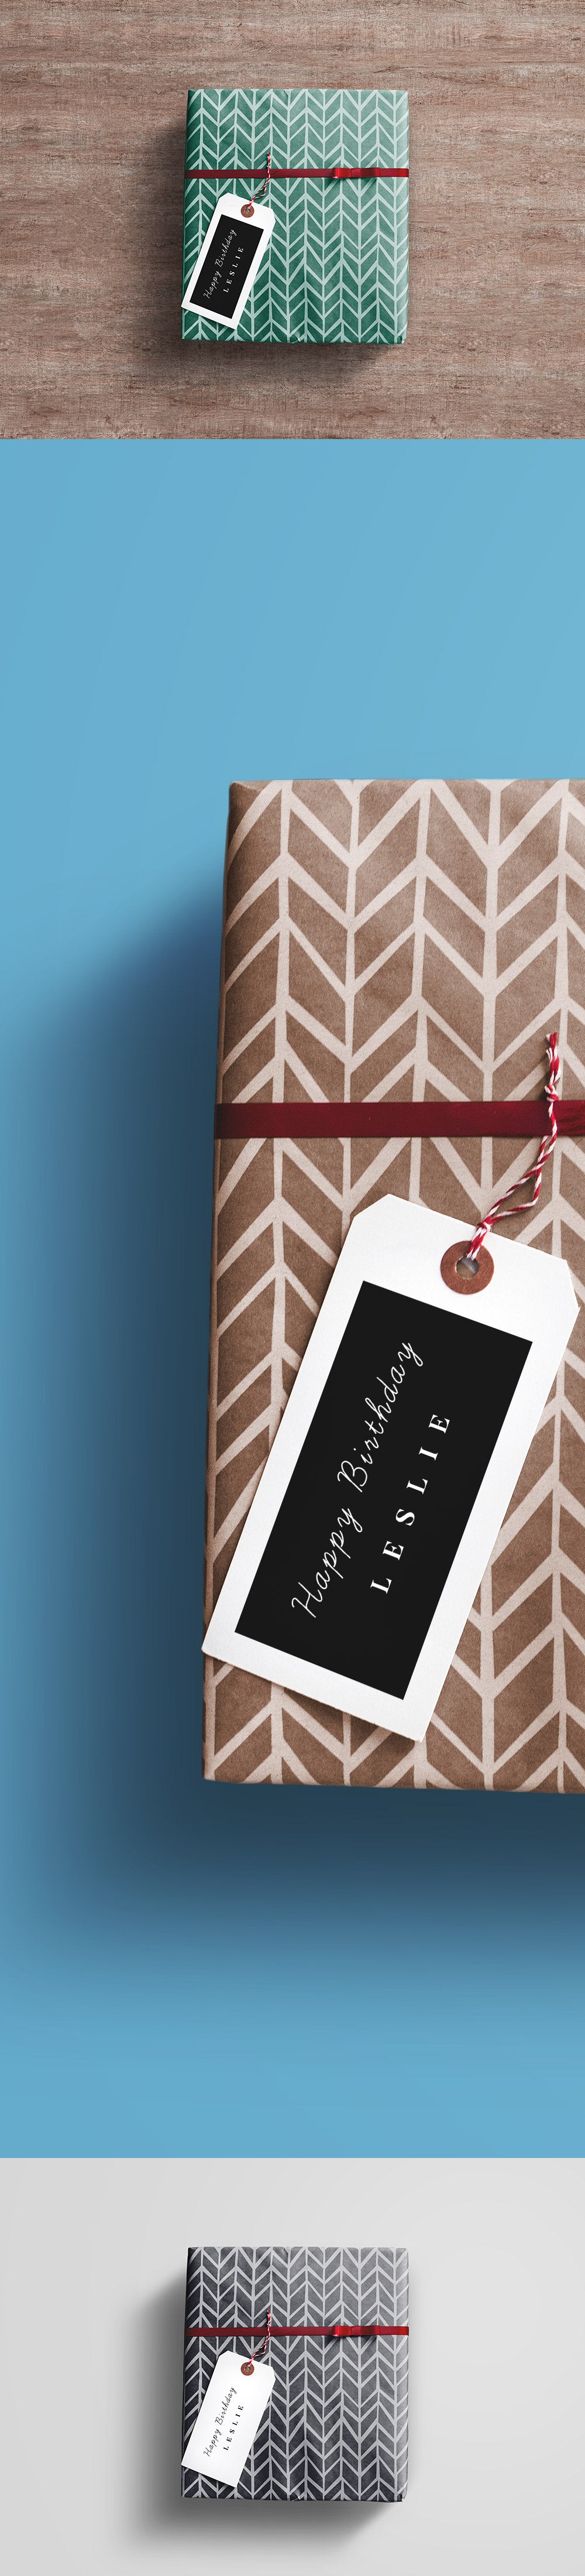 Download Free Gift Wrap Packaging Box Psd Mockup Creativebooster